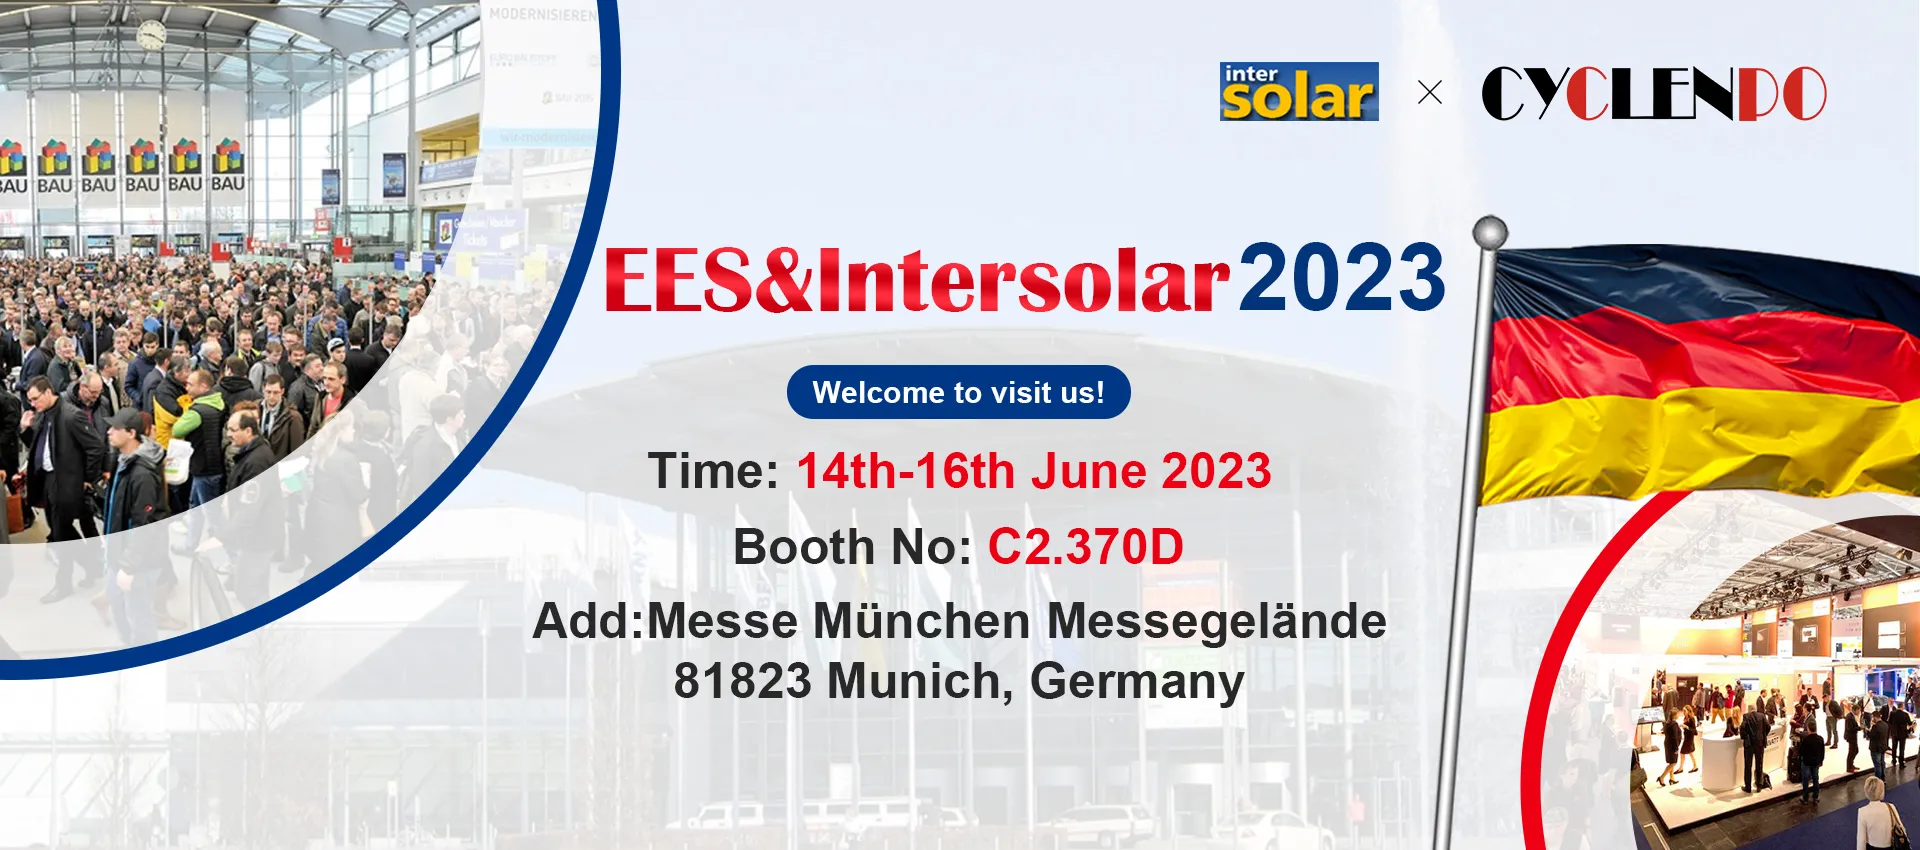 Welcome to Cyclenpo Germany EES & Inter solar 2023 exhibition